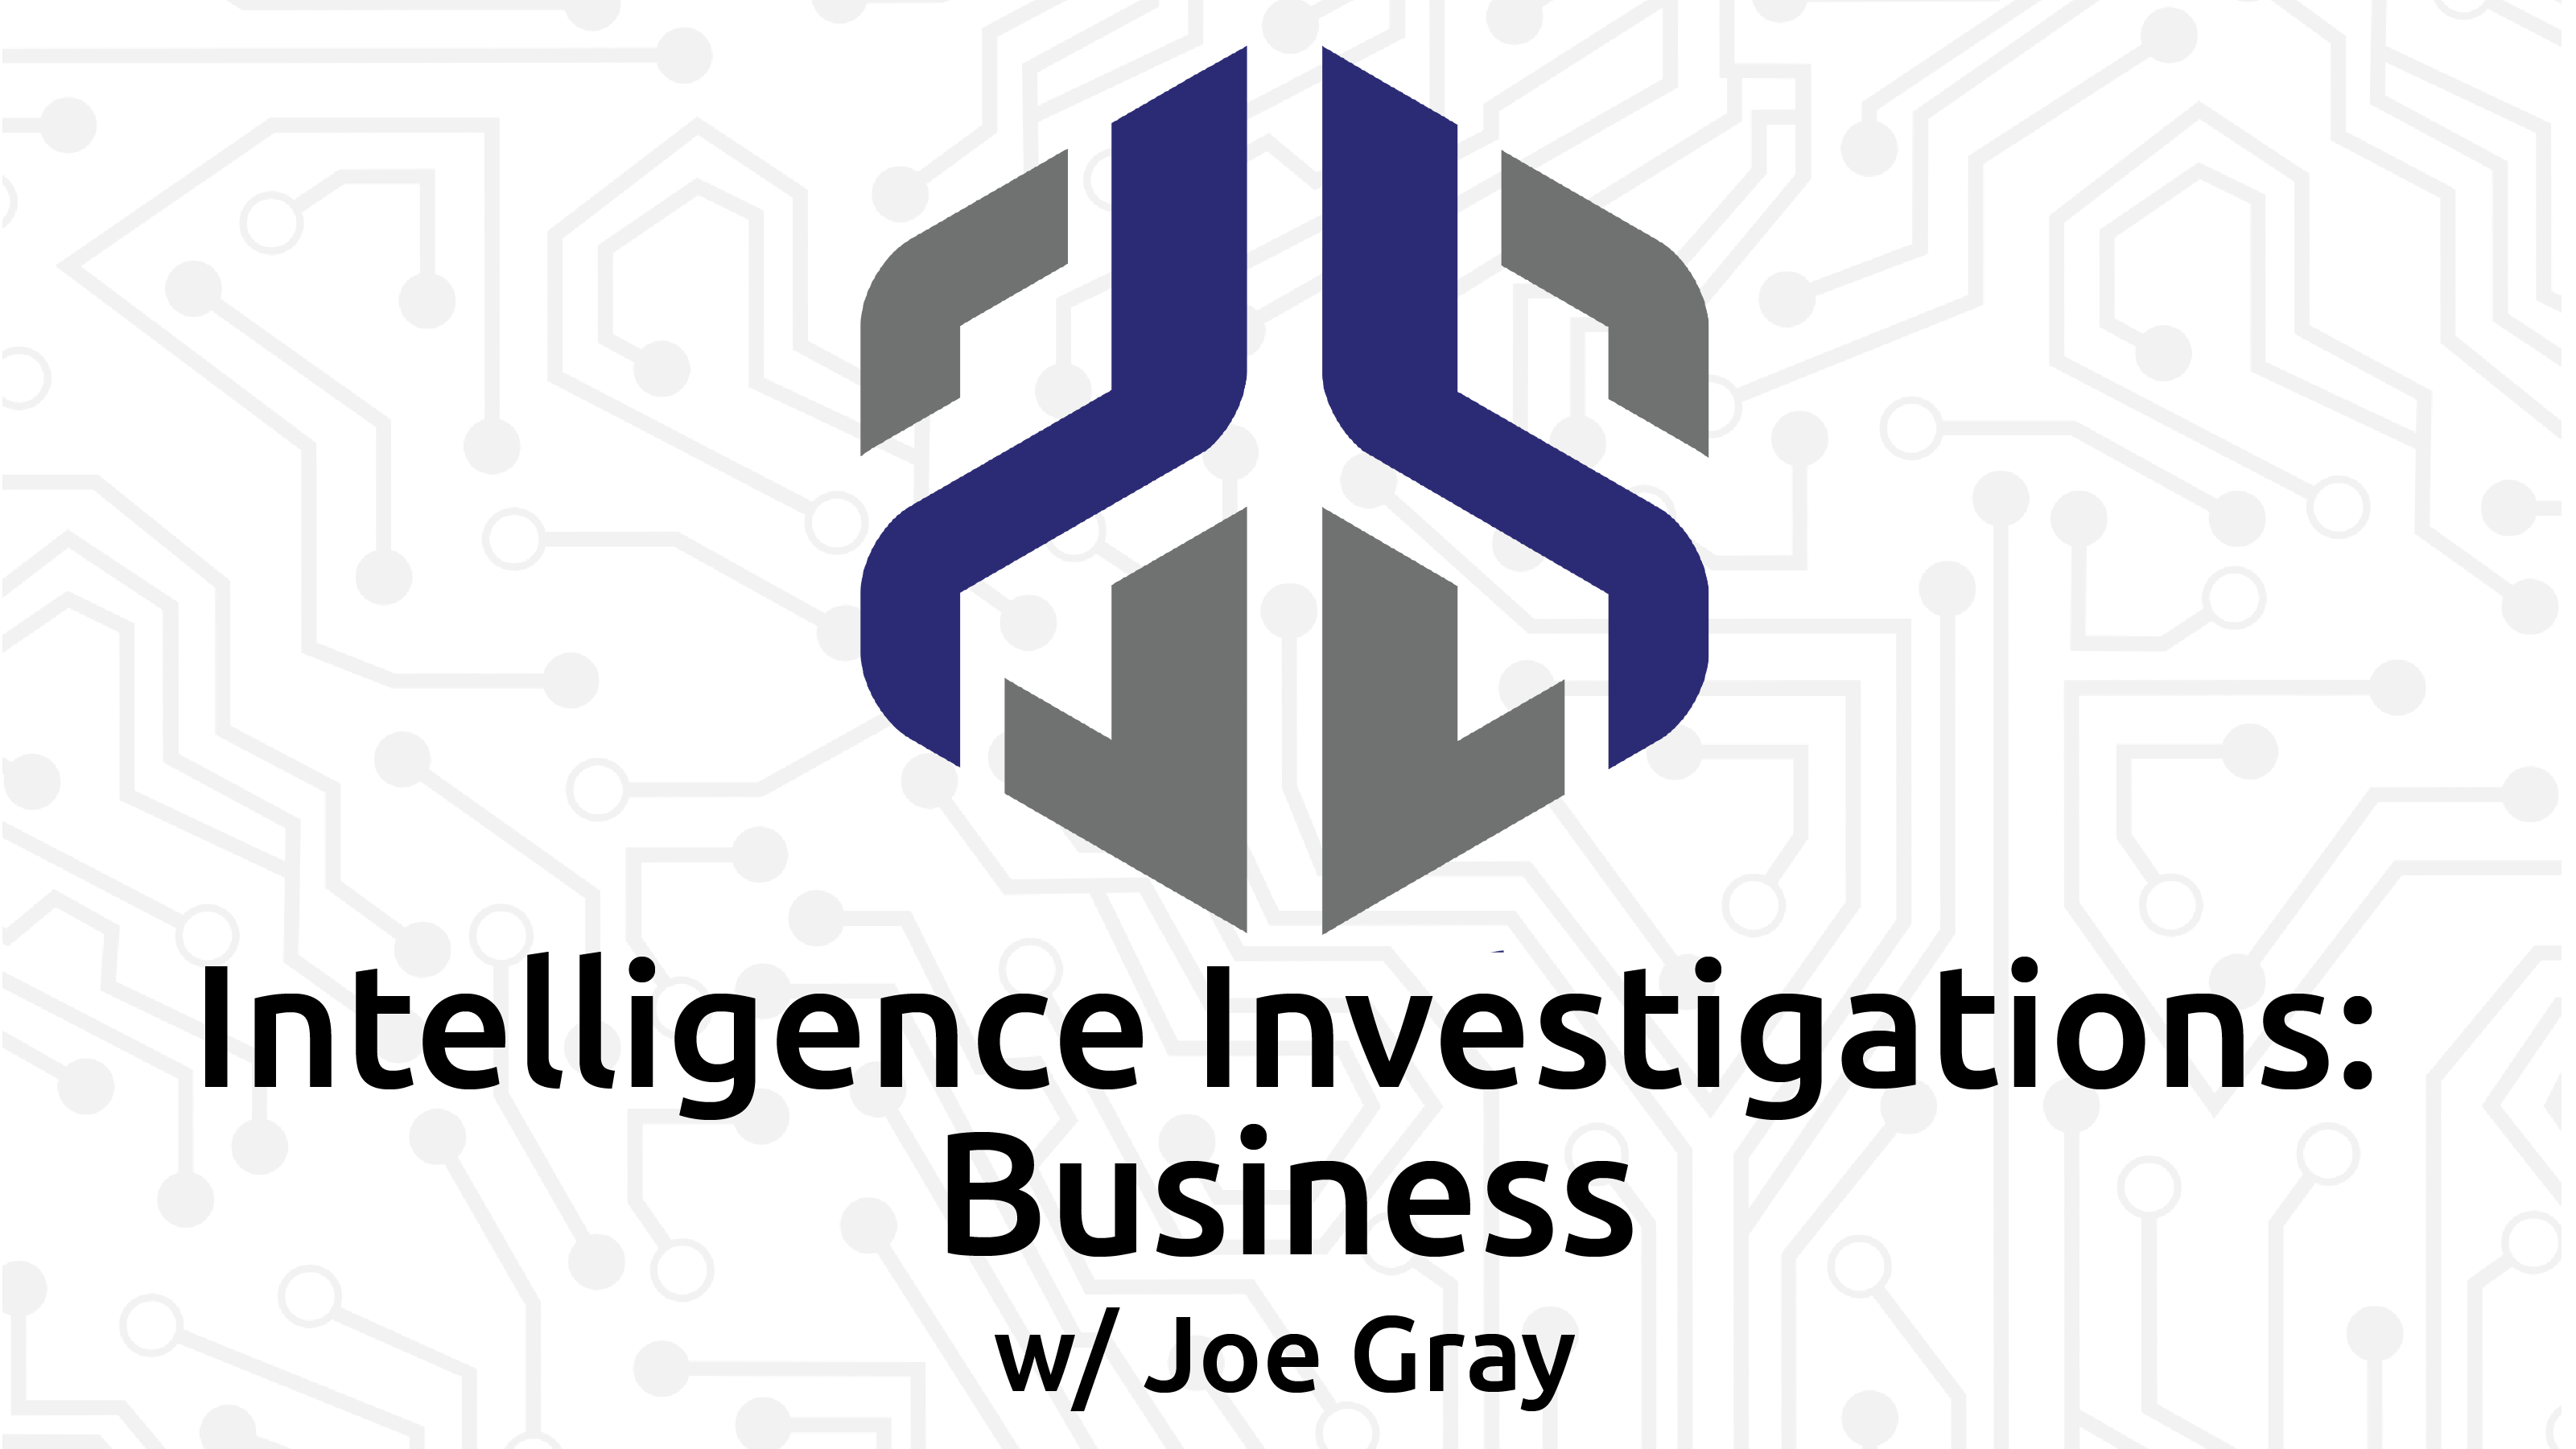 Intelligence Investigations: Business with Joe Gray